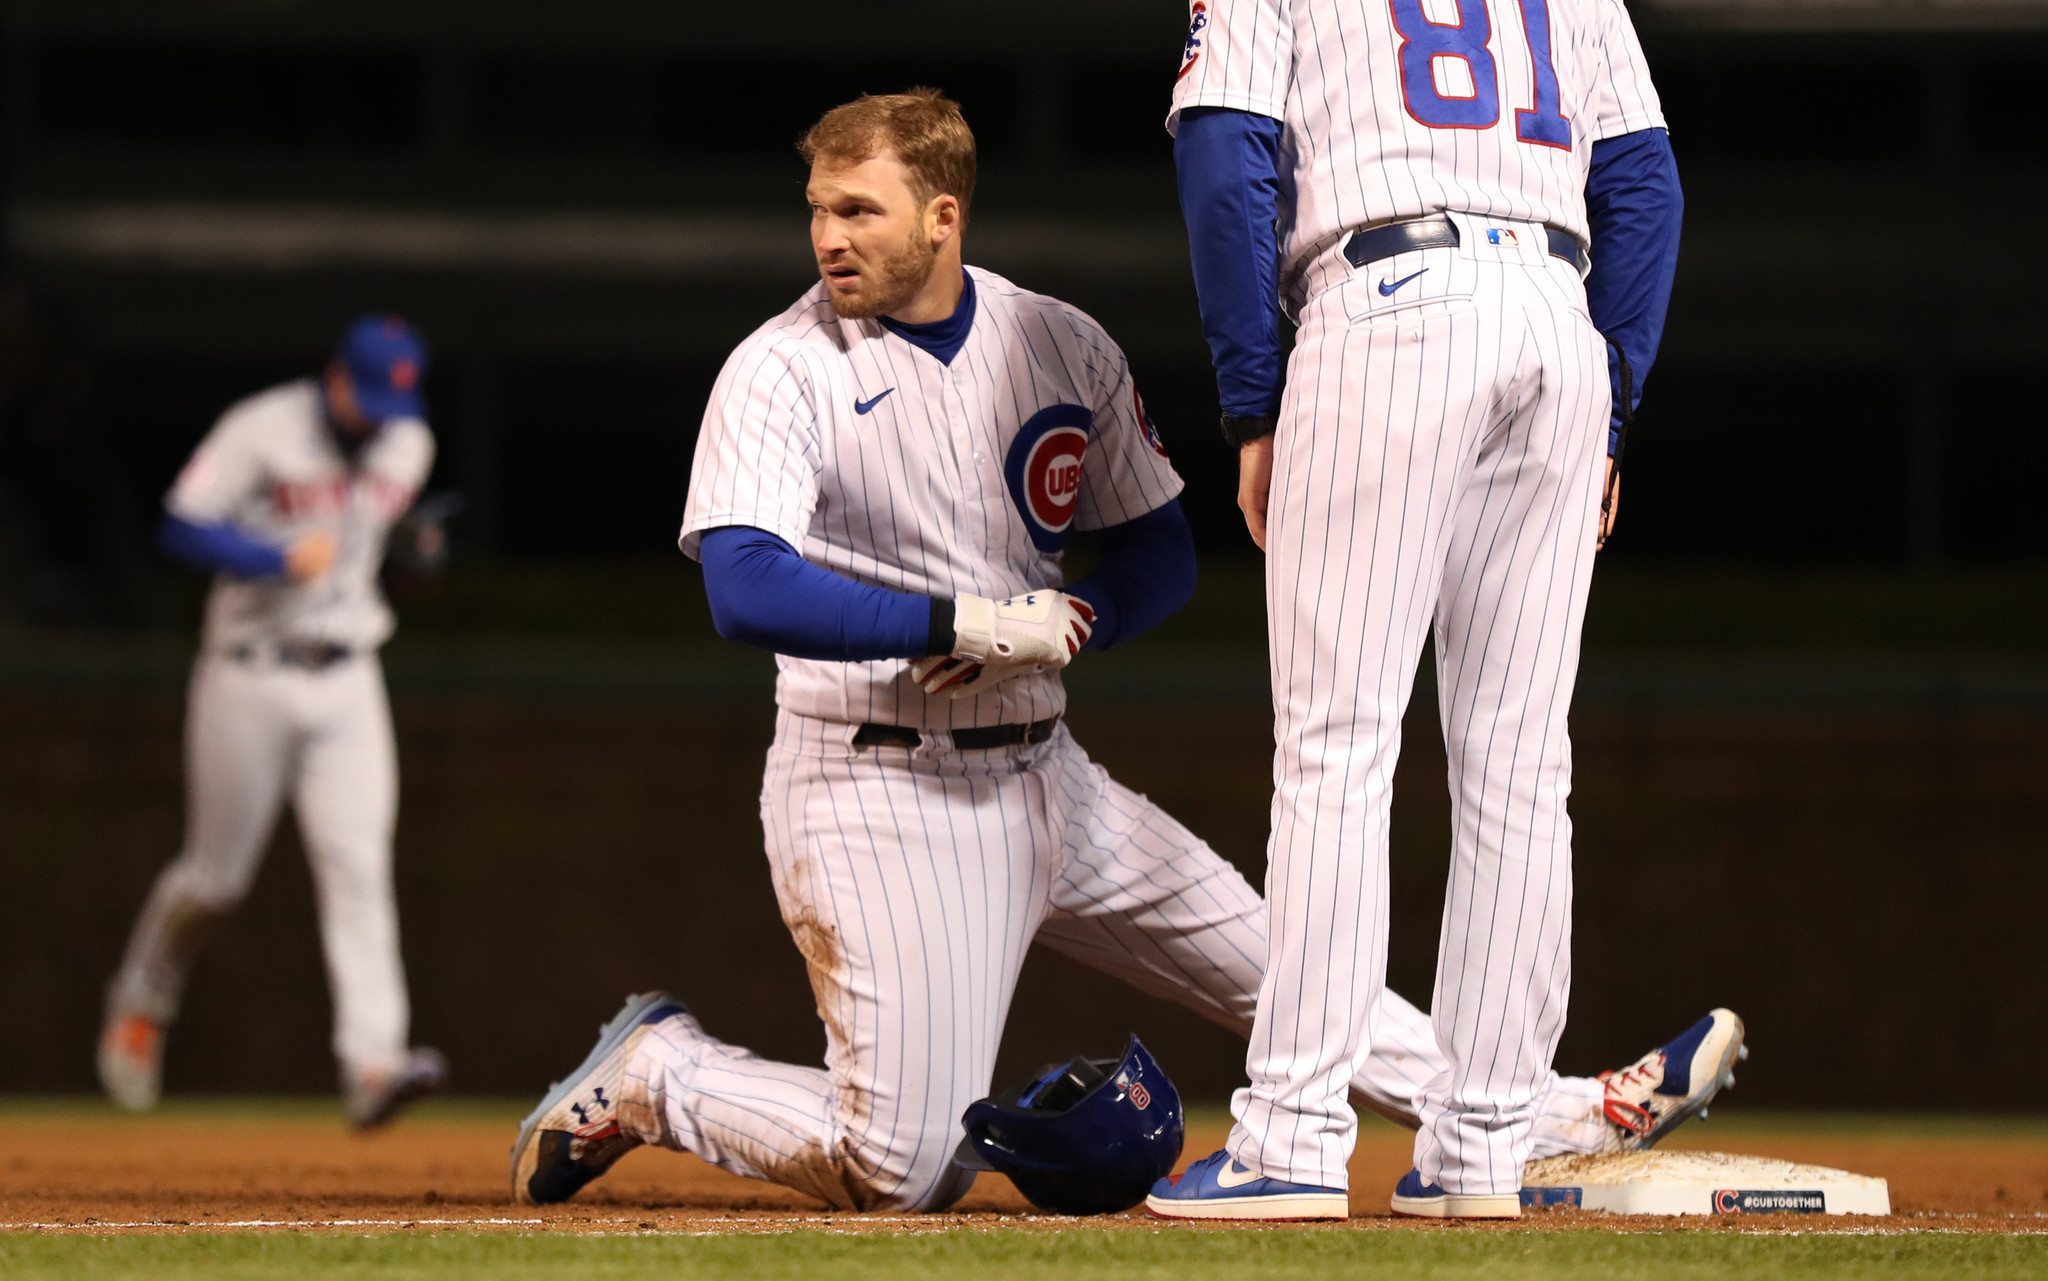 Chicago Cubs: Why Ian Happ is hitting leadoff, and center field options